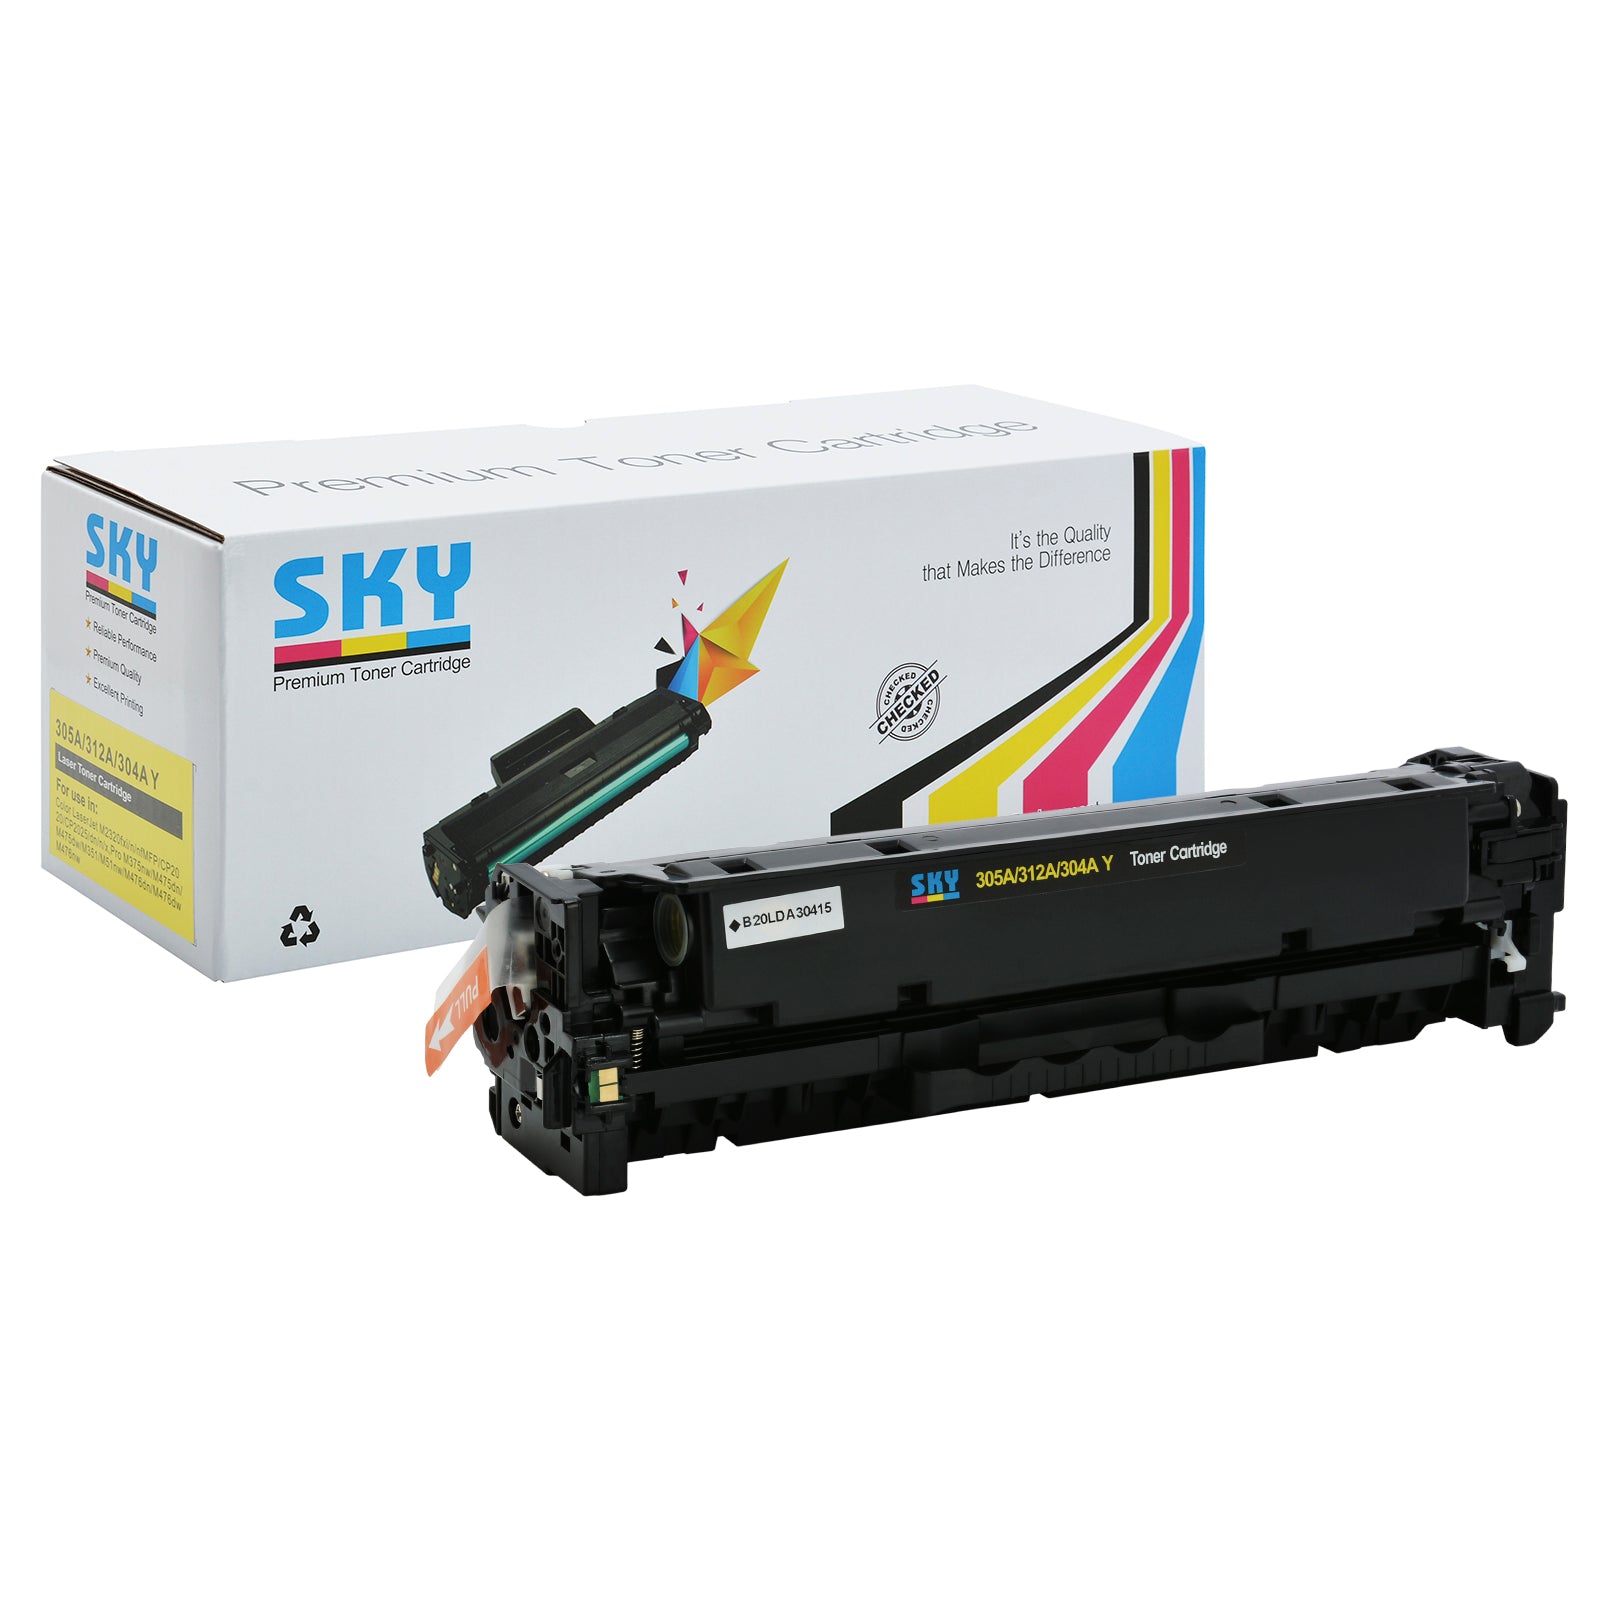 SKY 305A  Compatible Toner Cartridge for HP LaserJet Pro 400   MFP M451 and Pro 300 MFP M375